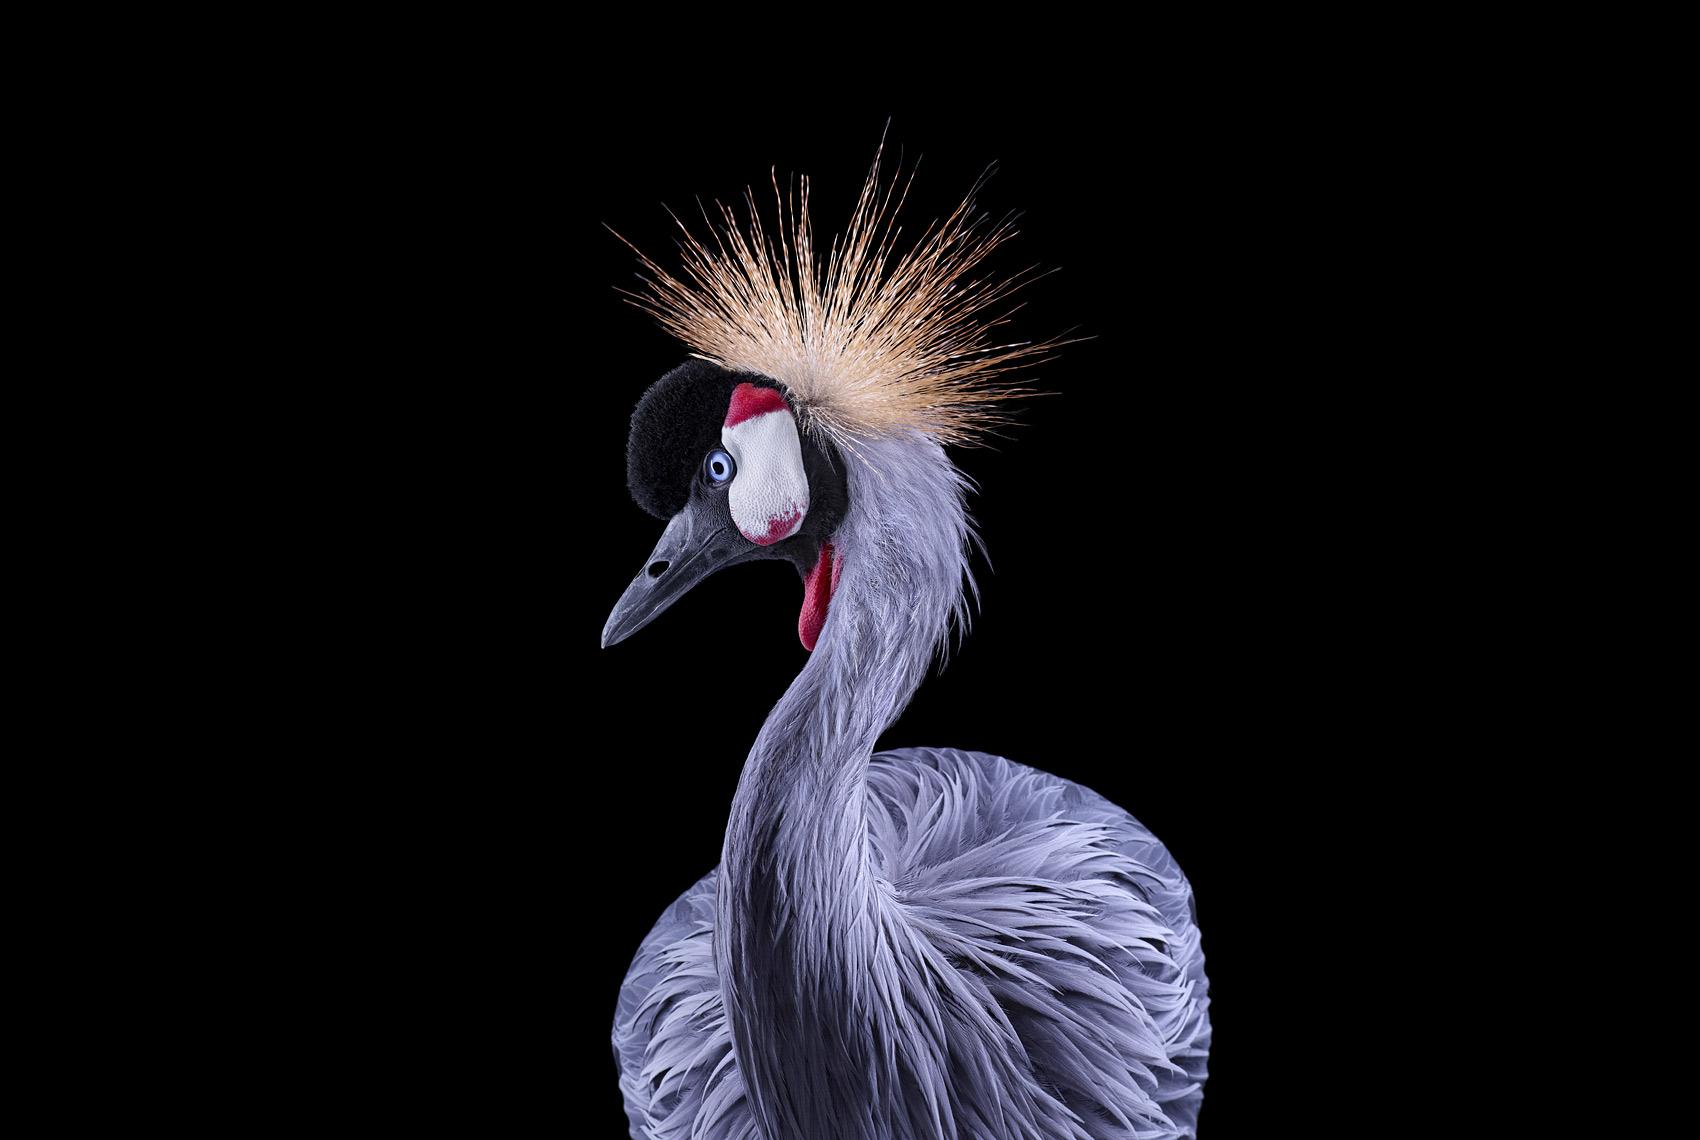 'African Crowned Crane #1, Los Angeles, CA, 2011' is a limited-edition photograph by contemporary artist Brad Wilson from the ‘Affinity’ series which features studio portraits of wild animals. 

This photograph is sold unframed as a print only. It